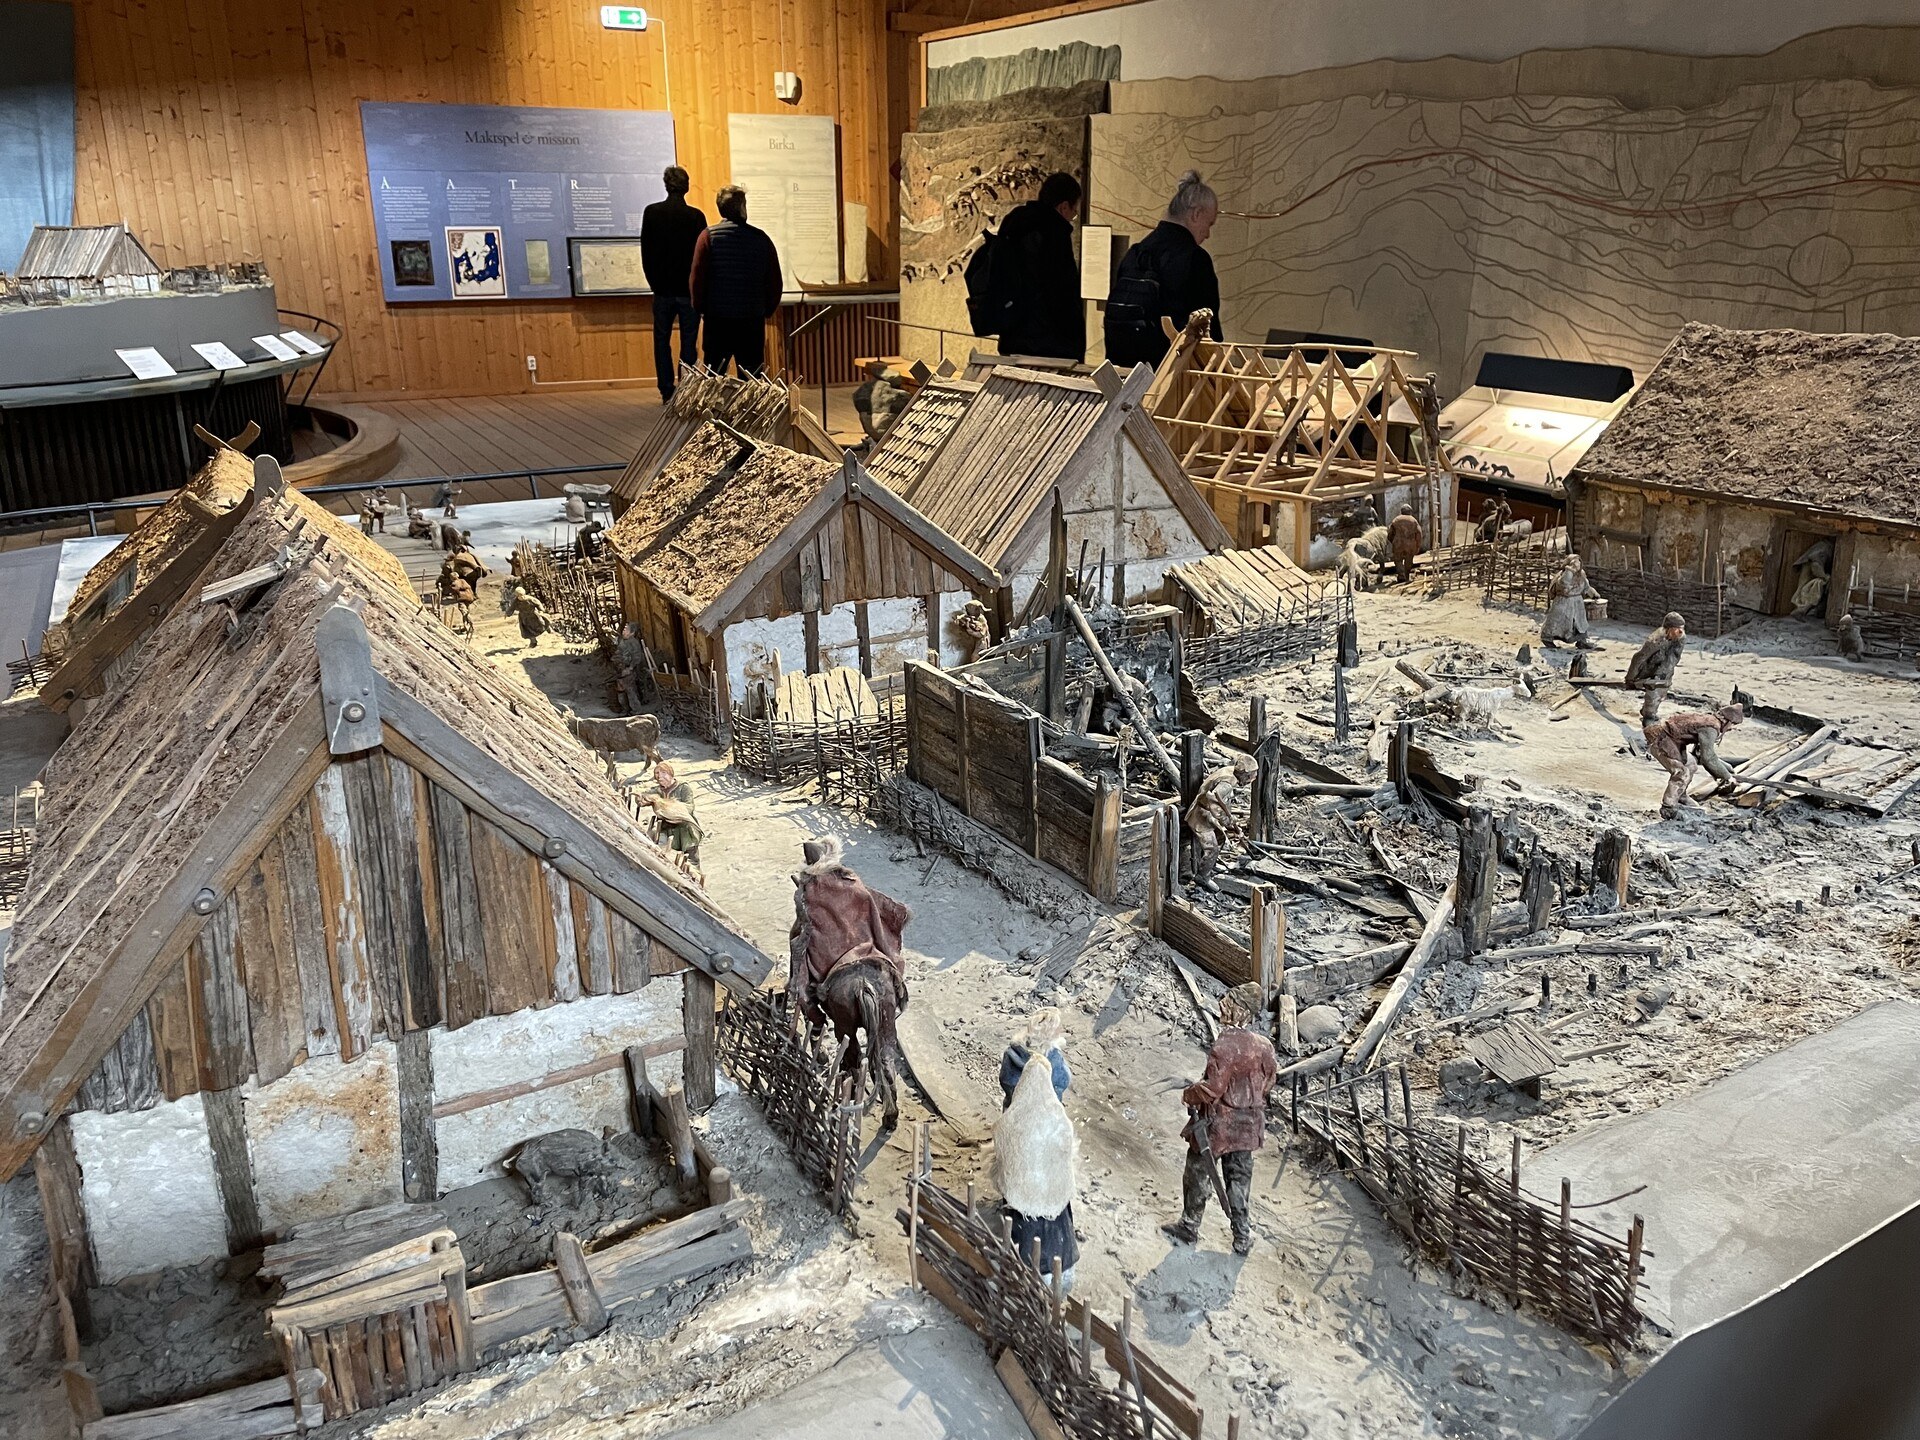 A diorama of grim life in a Viking town a thousand years ago